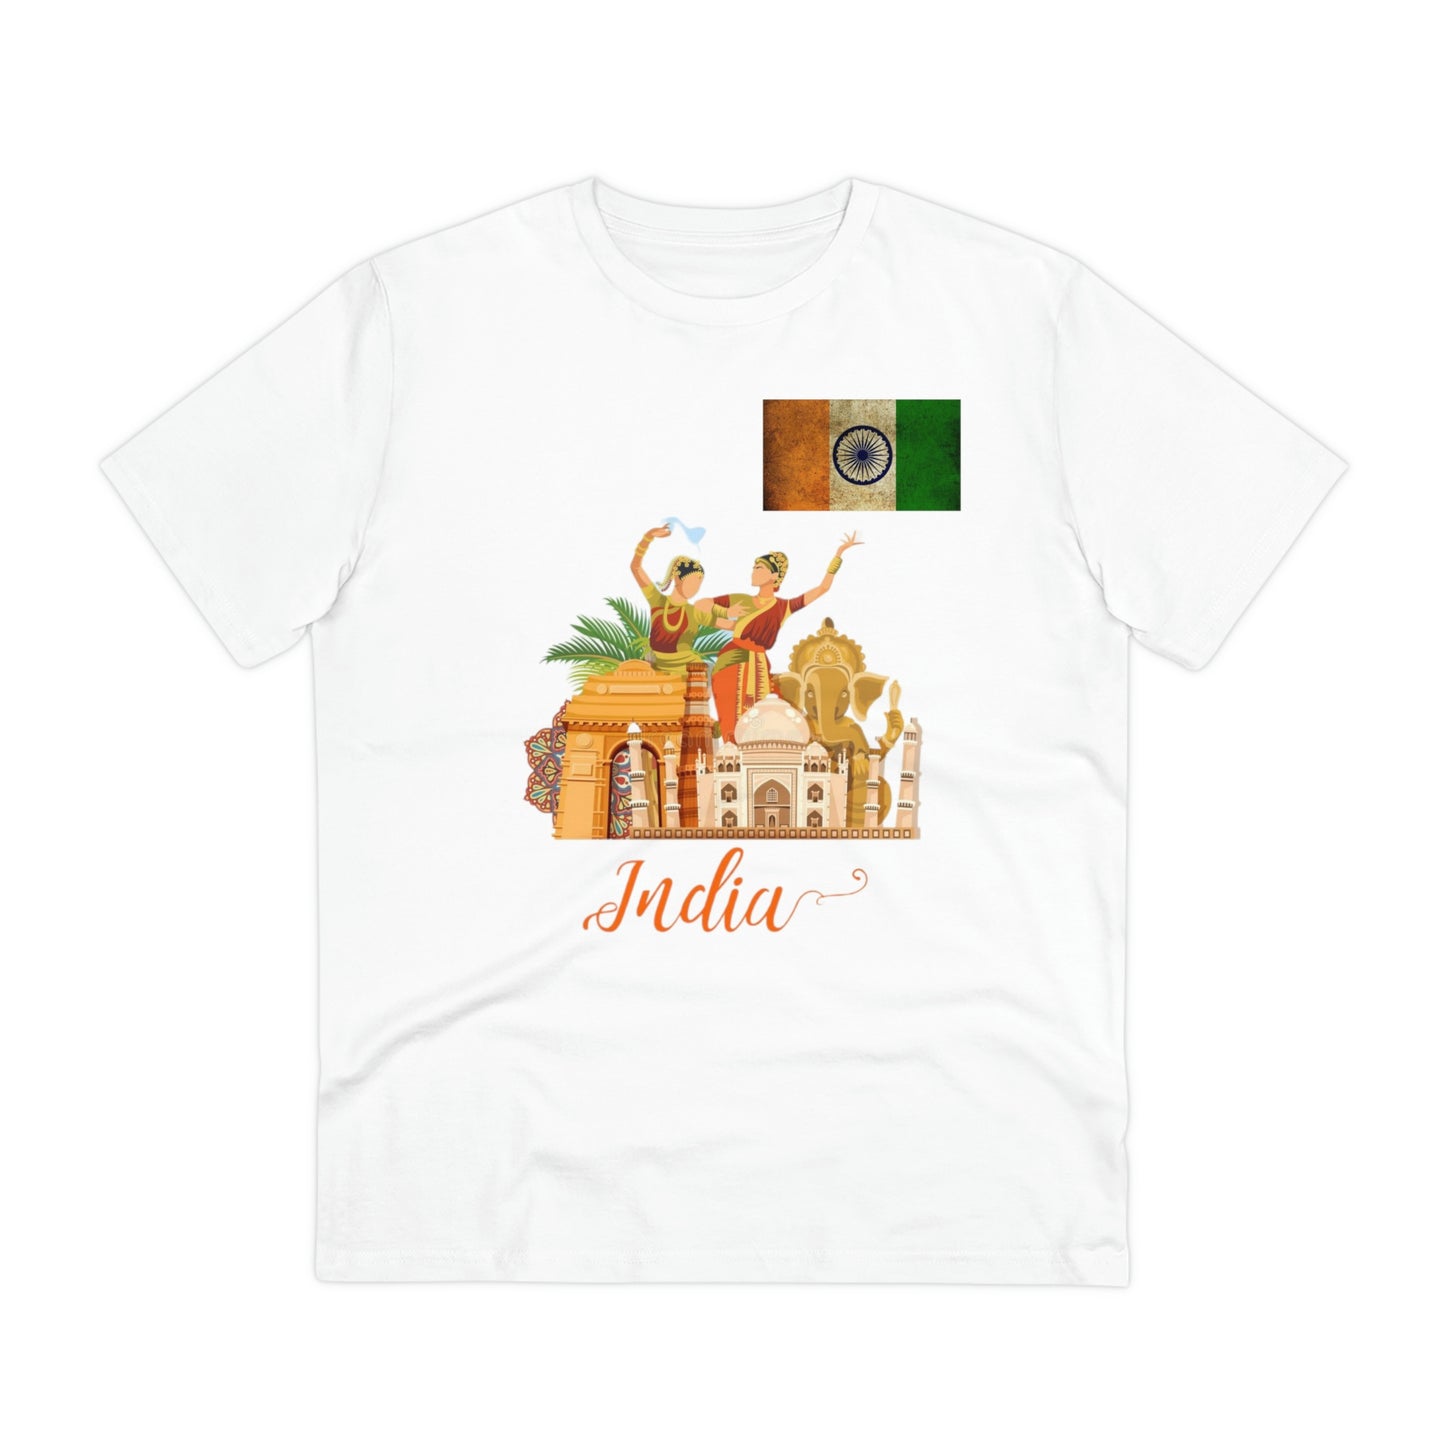 Organic Welcome to India 🇮🇳 T-shirt - Unisex